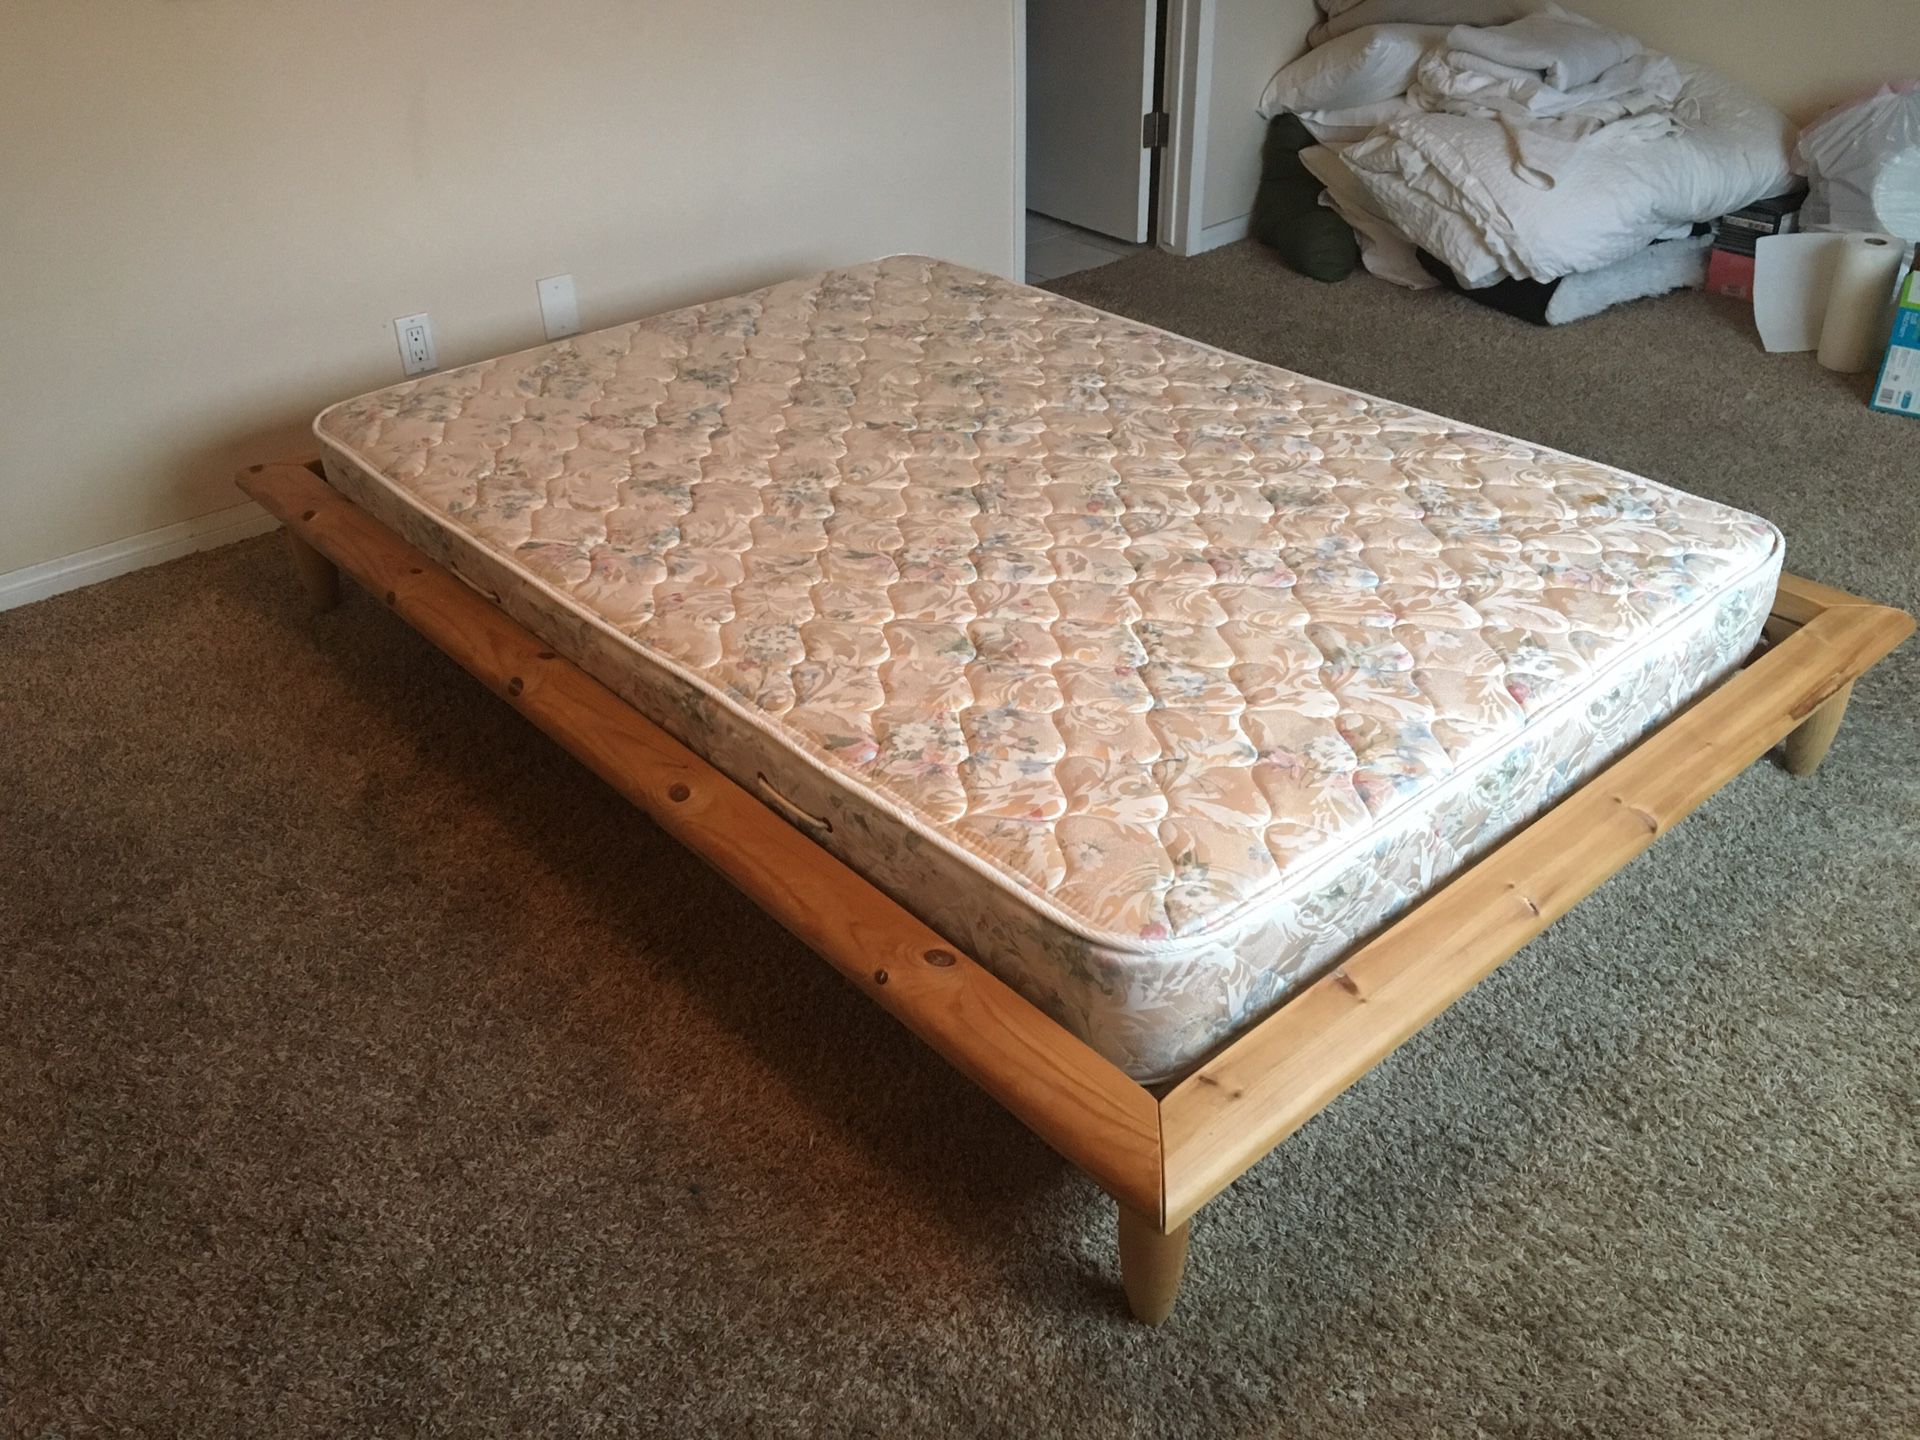 FREE...Full Ikea bed frame and mattress. Needs to be gone ASAP come pick up! Bedding not included.